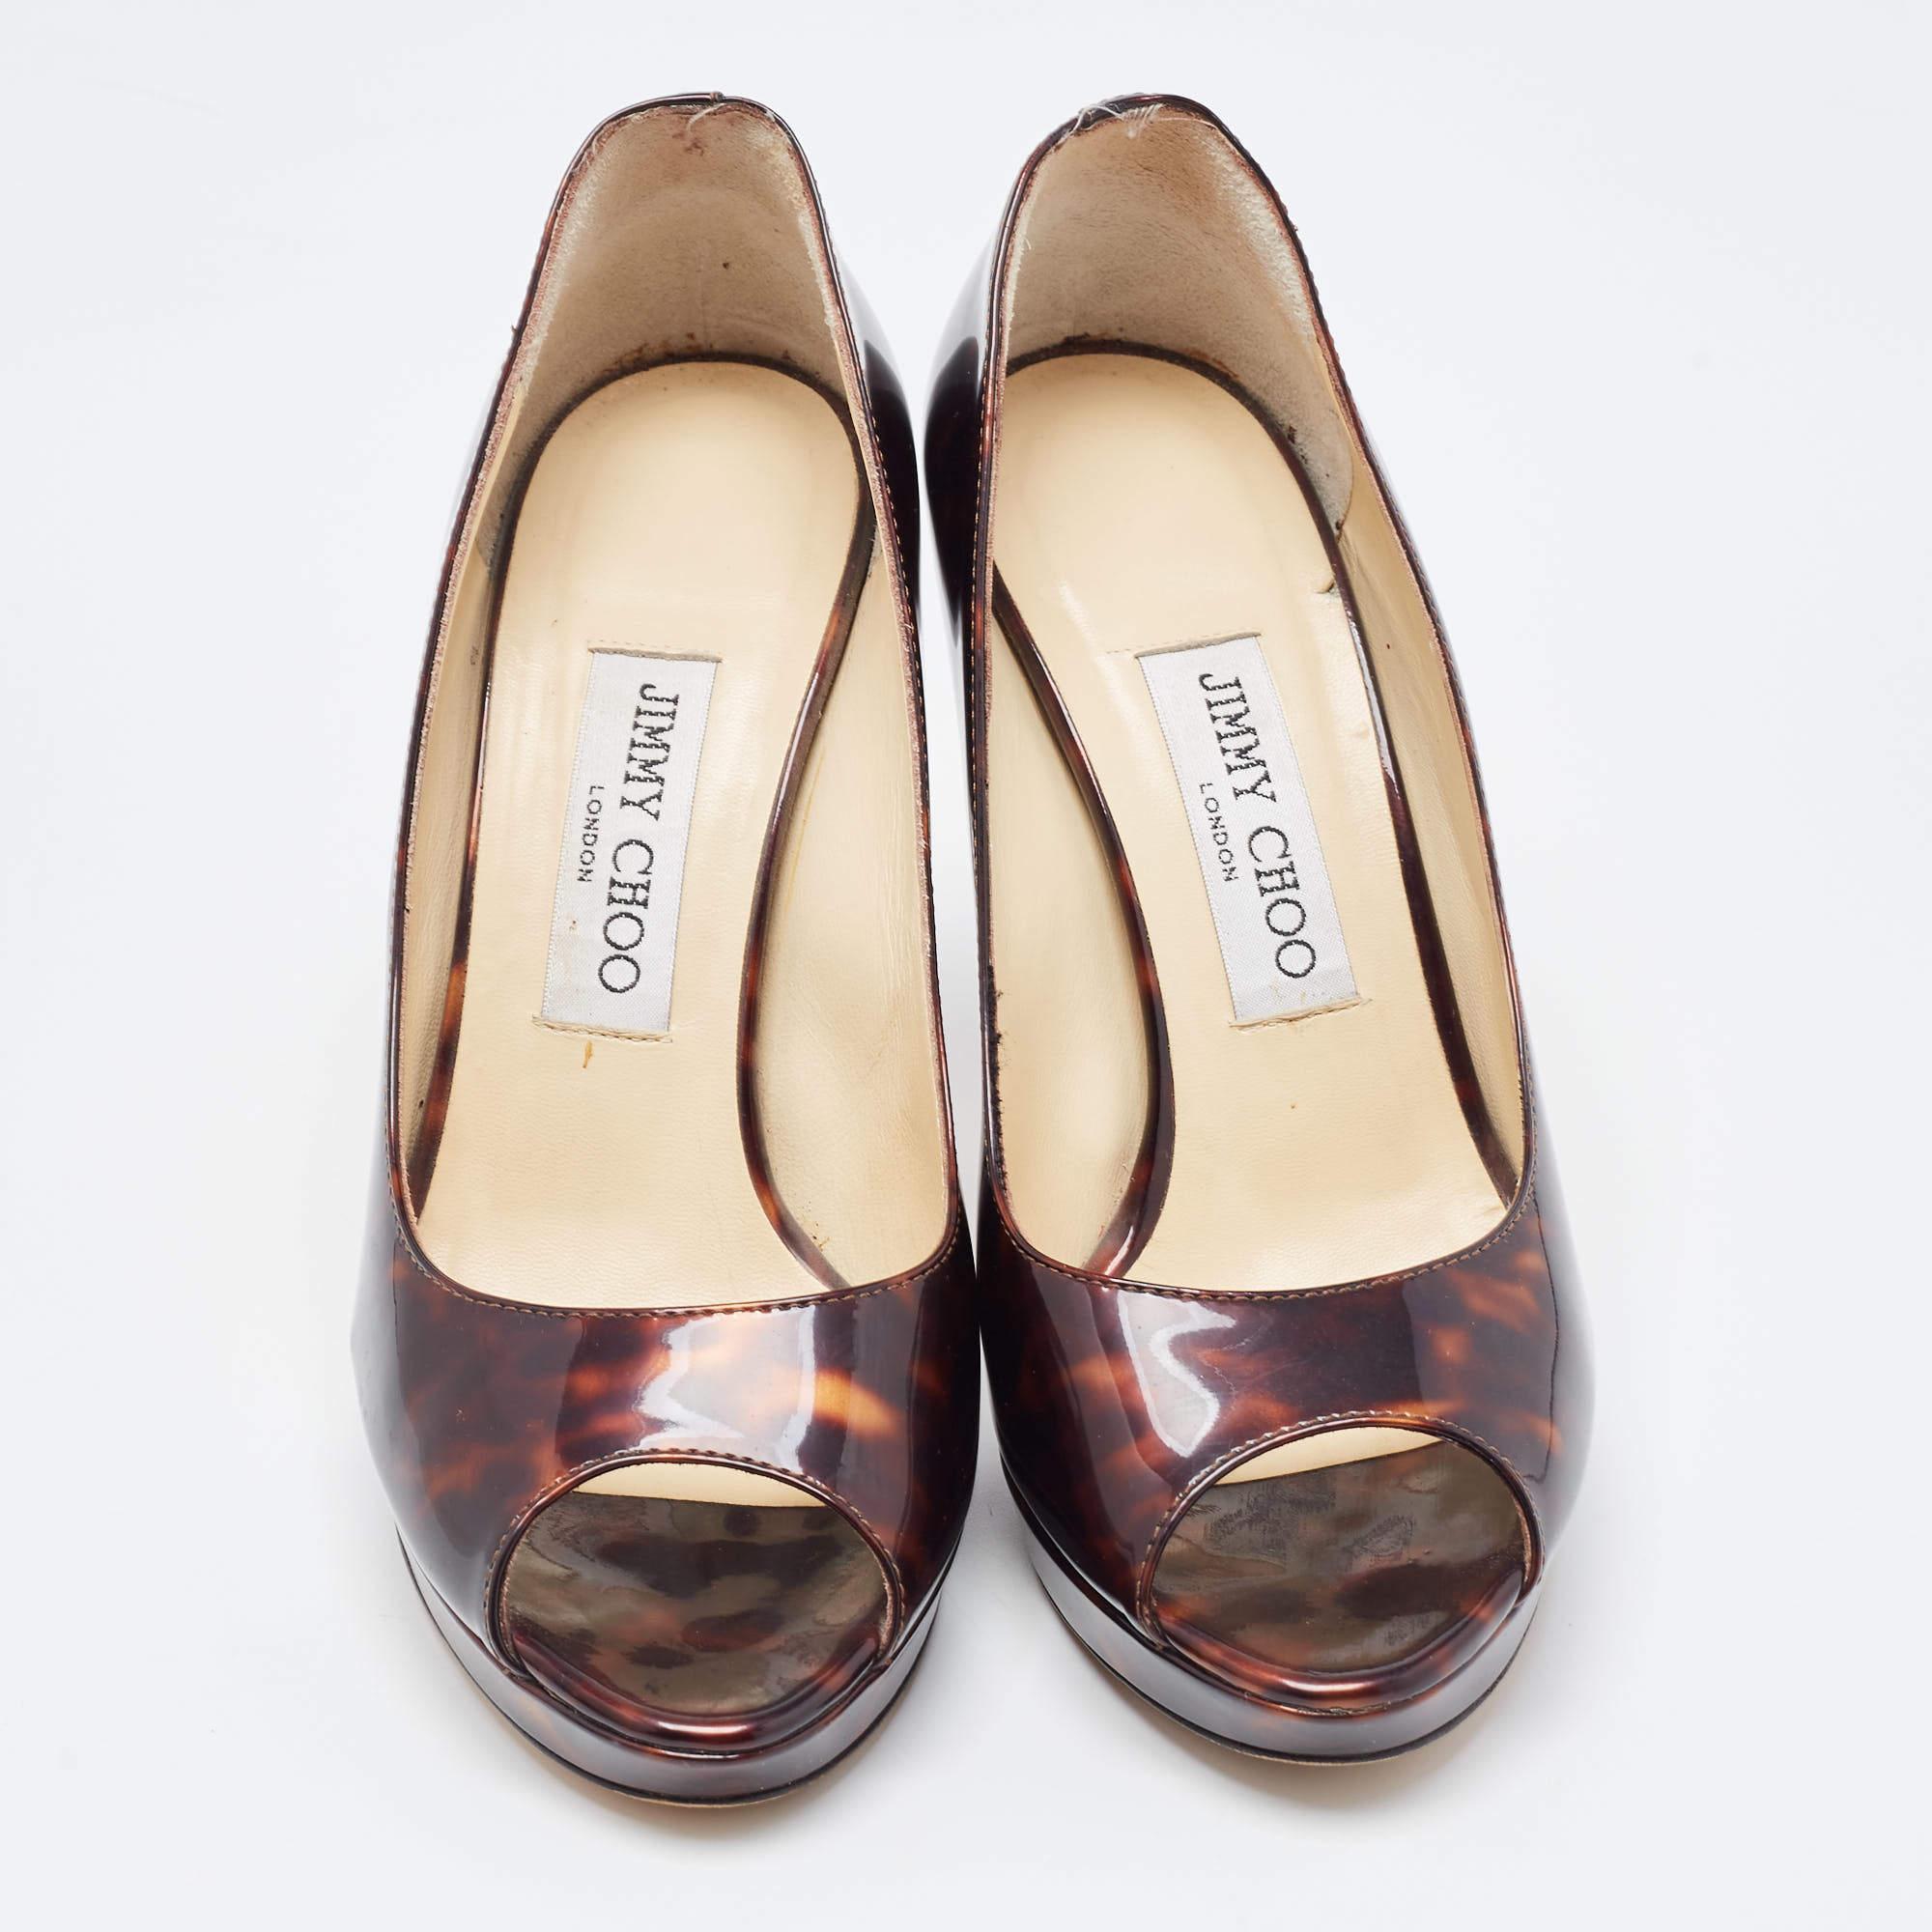 Jimmy Choo Black/Brown Patent Leather Slip On Pumps Size 37.5 For Sale 3